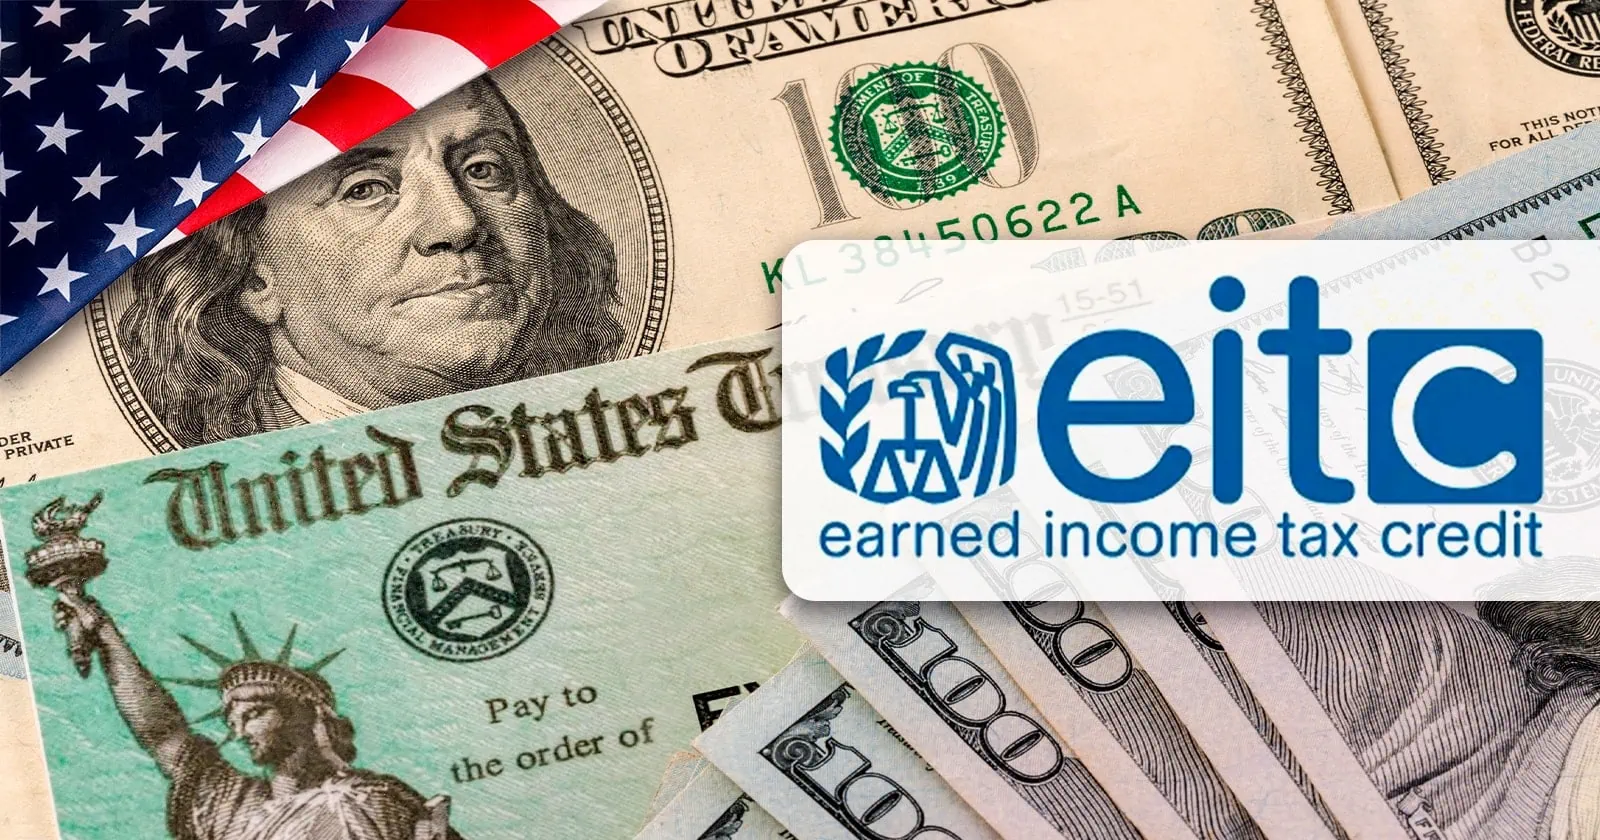 You Can Receive More Than $7000 Dollars This Year Earned Income Tax Credit in the United States